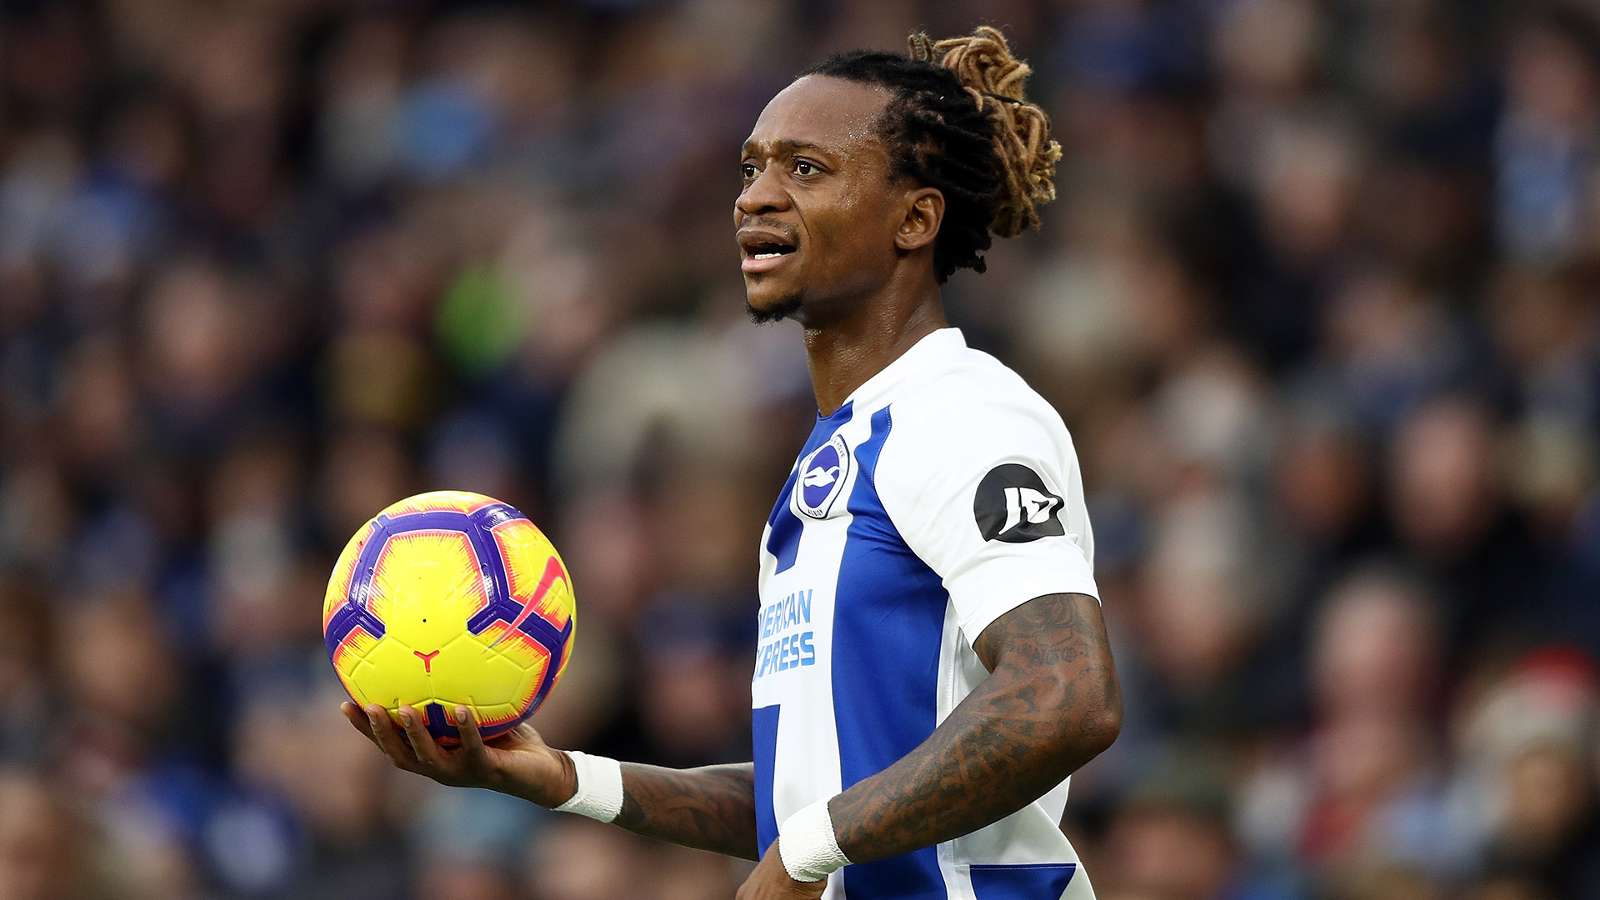 Premier League: Gaetan Bong extends Brighton and Hove Albion’s stay